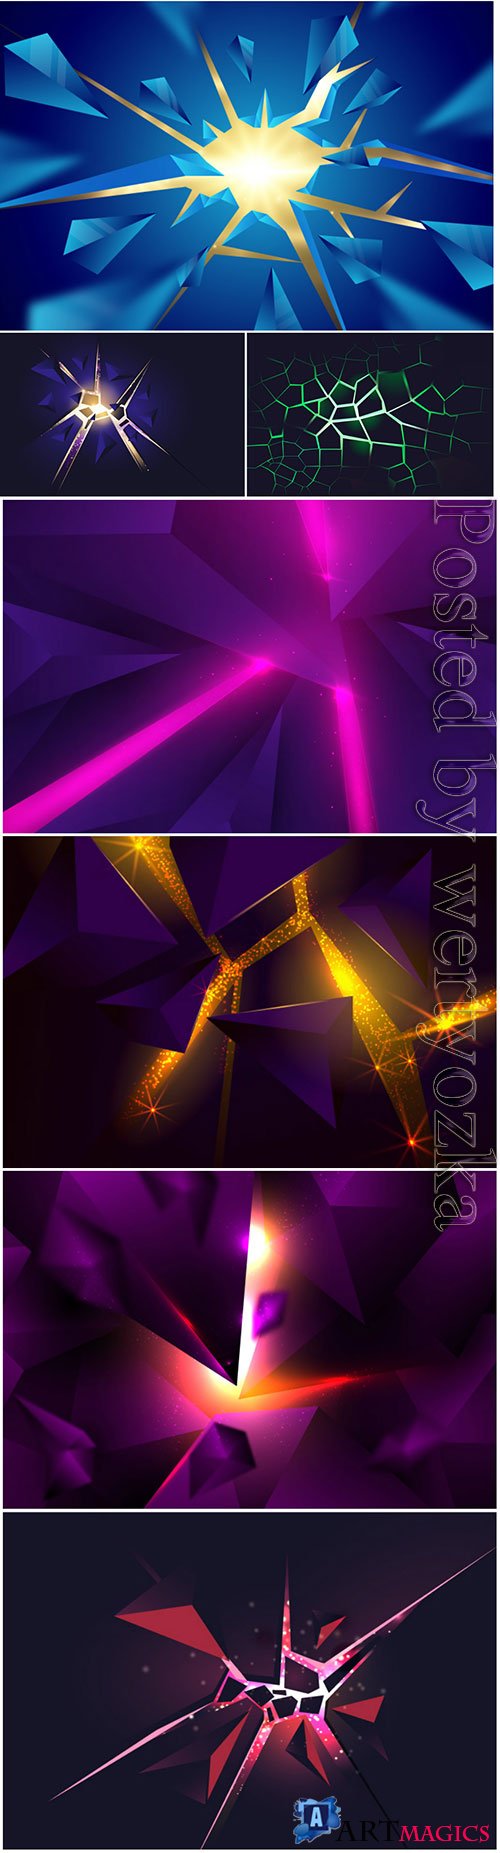 3d explosion with light vector background